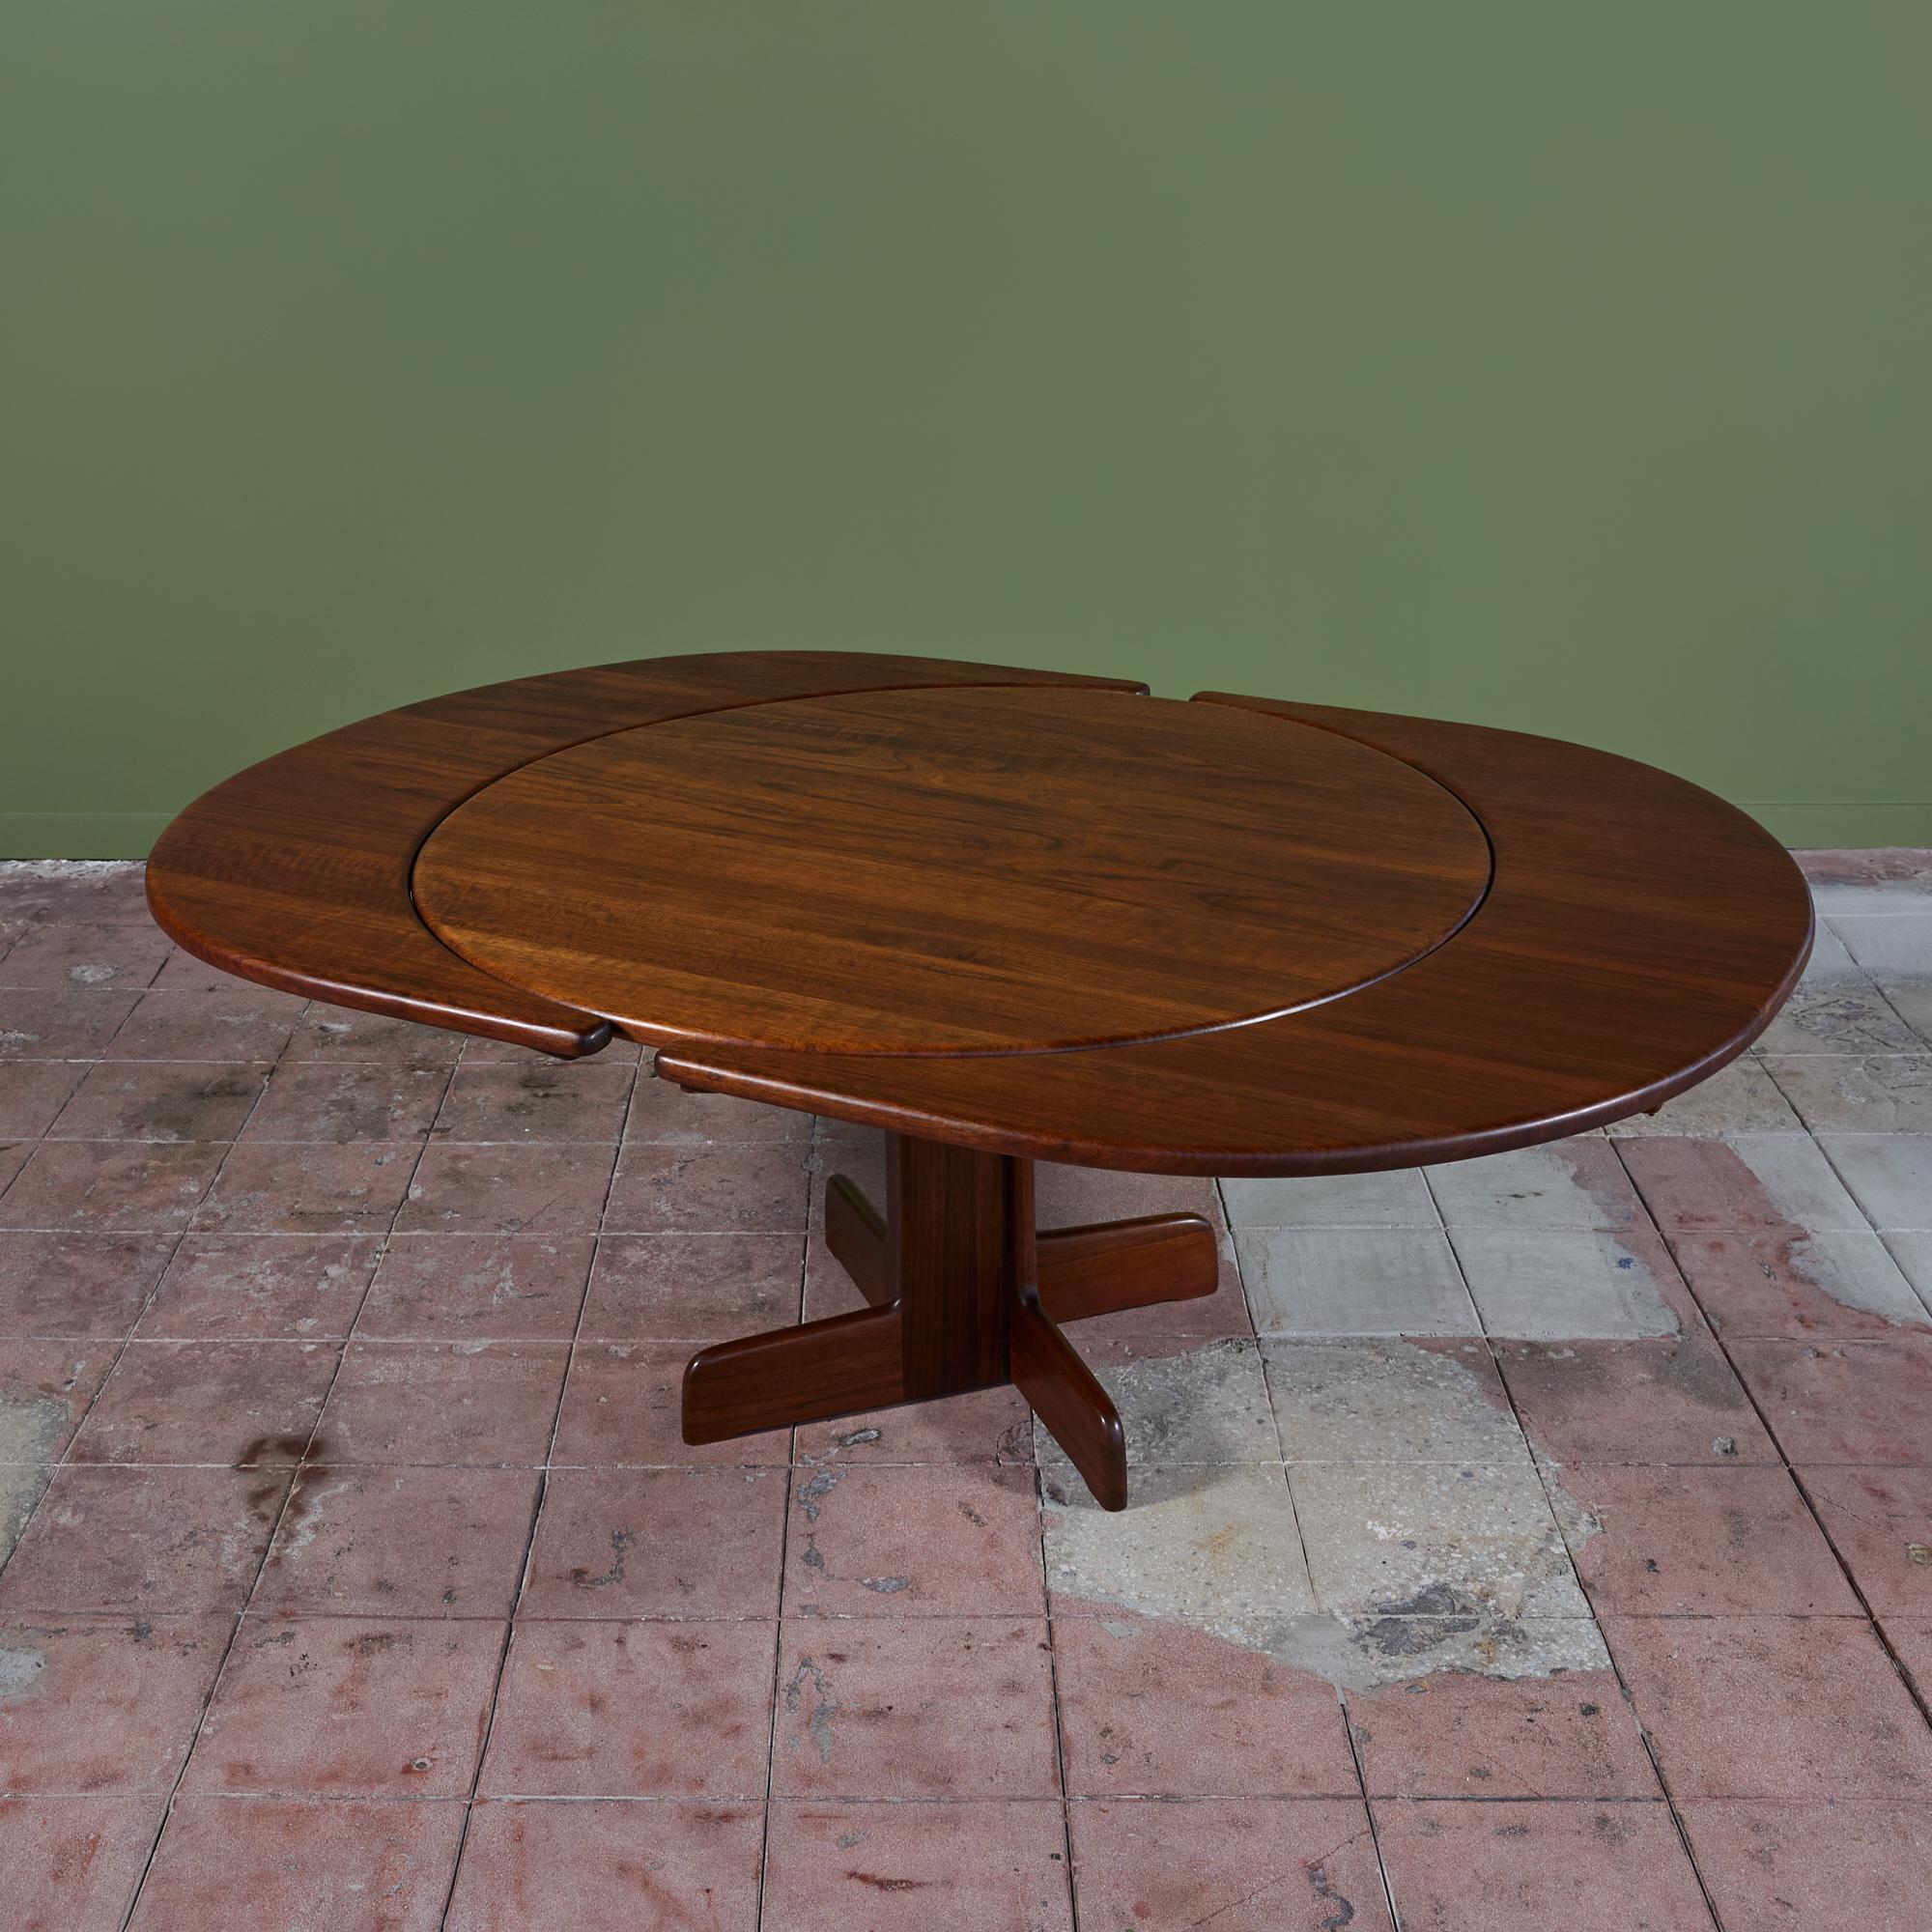 American made dining table, c.1970s, by Gerald McCabe. The table features a round top situated on a pedestal base made of solid Shedua. The table comes with two crescent leaves which attach to the outers sides of the table expanding to comfortably